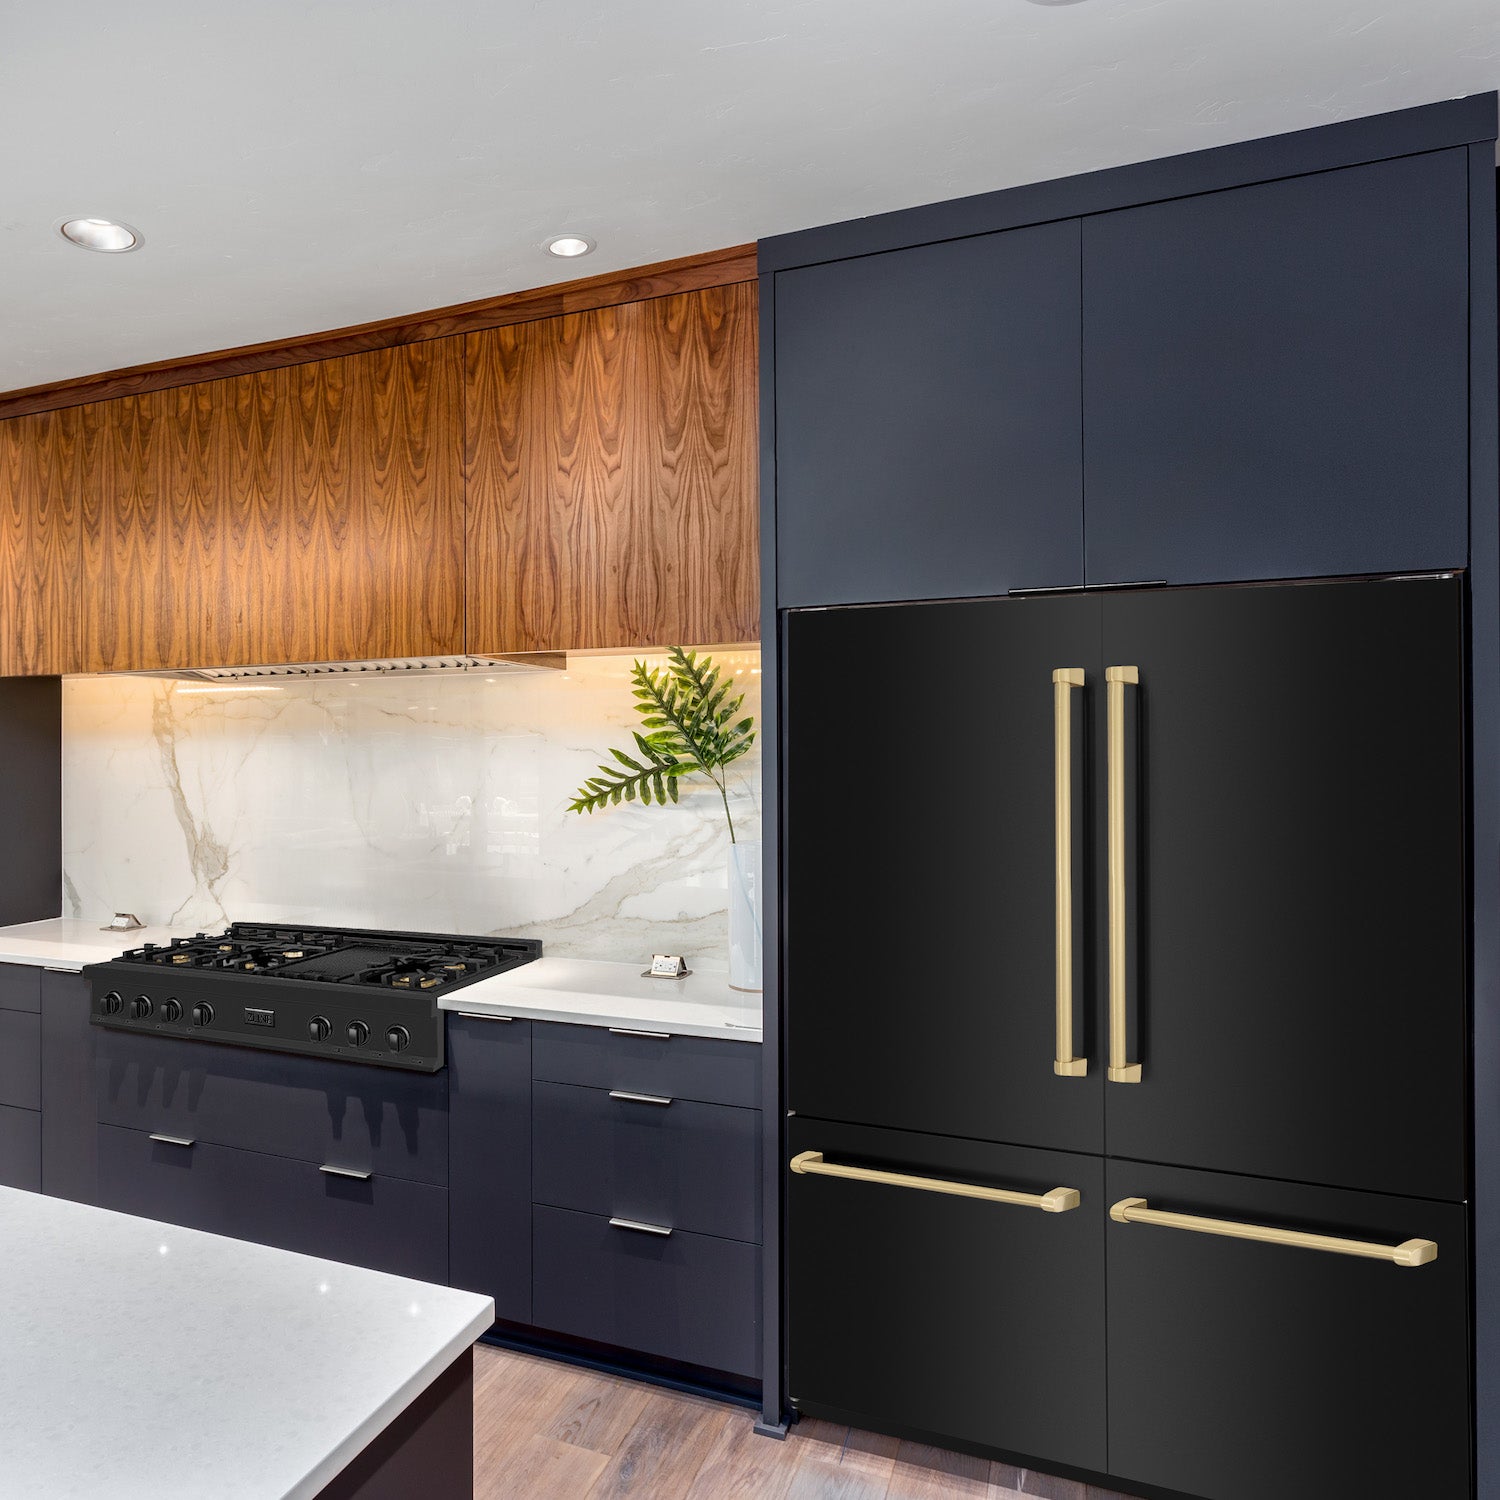 ZLINE Autograph Edition Built-in Refrigerator in Black Stainless Steel with Accent Handles in a kitchen.